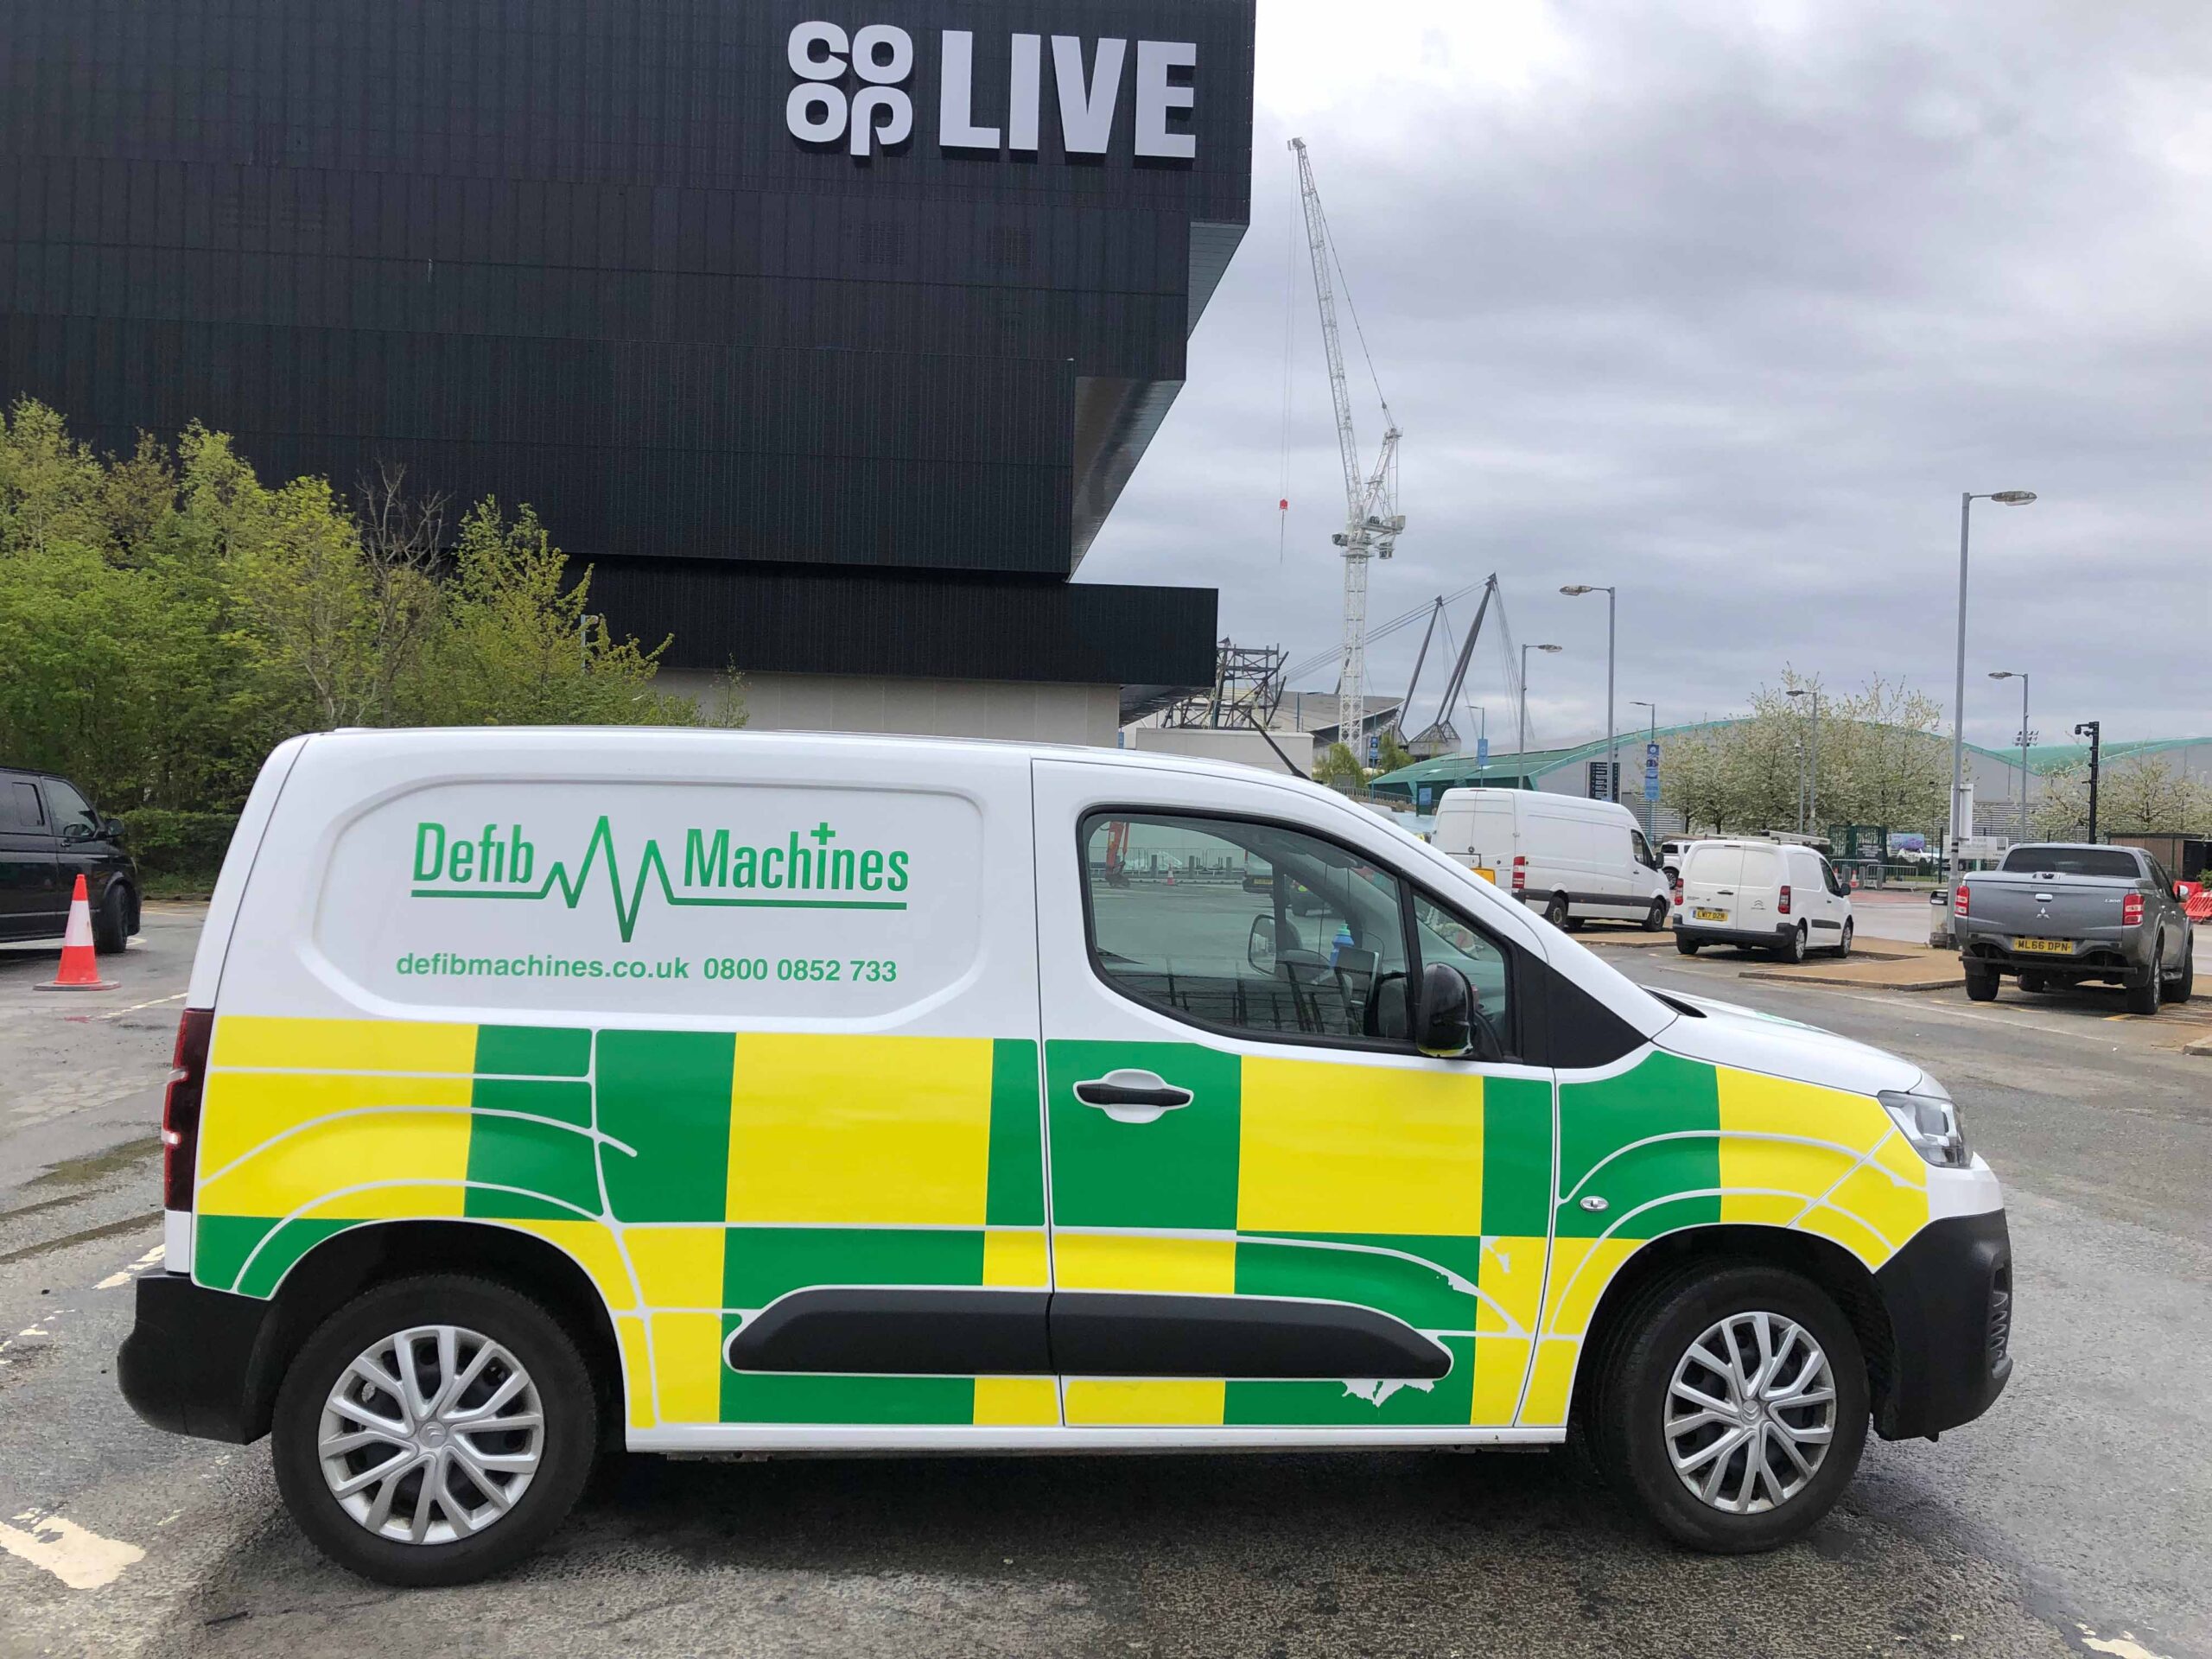 An image of a Defib Machines van outside the Co-Op LIVE Arena in Manchester